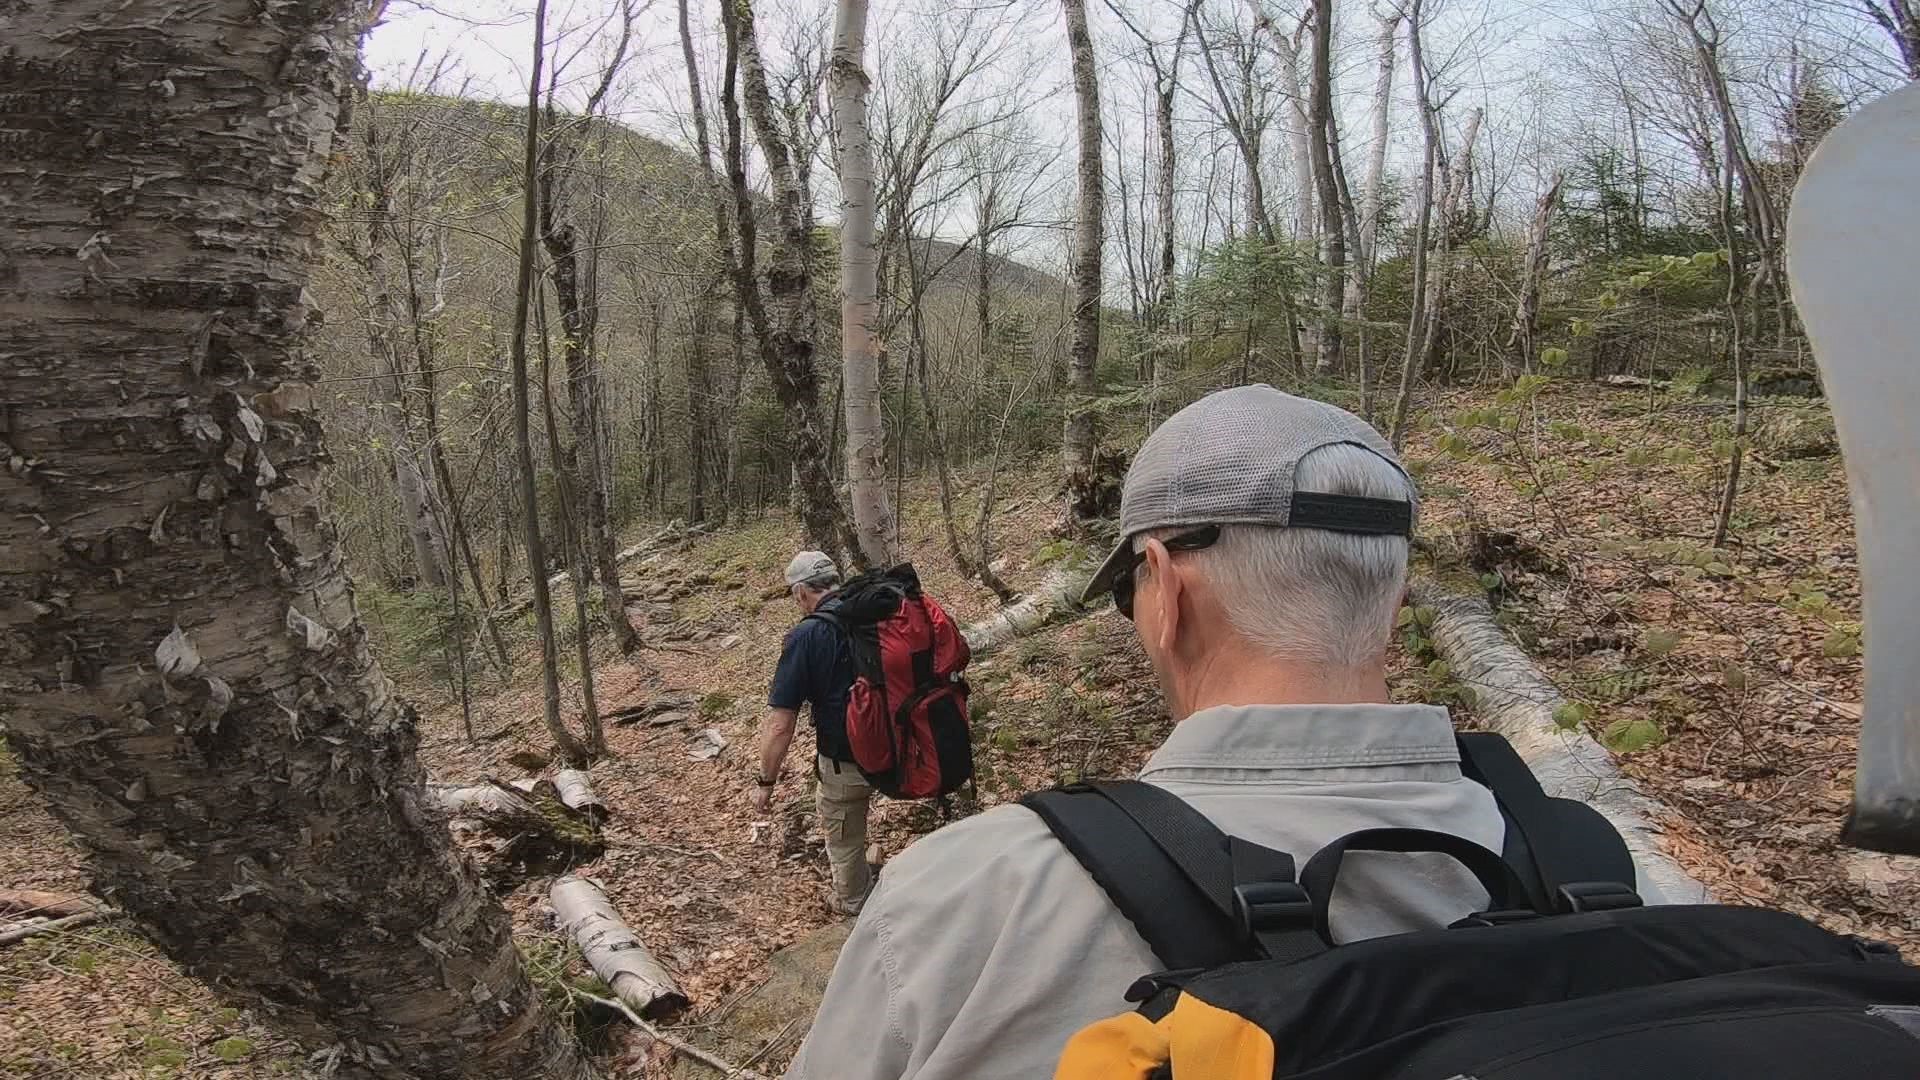 The Maine Appalachian Club oversees more than two hundred miles of trail in Maine.